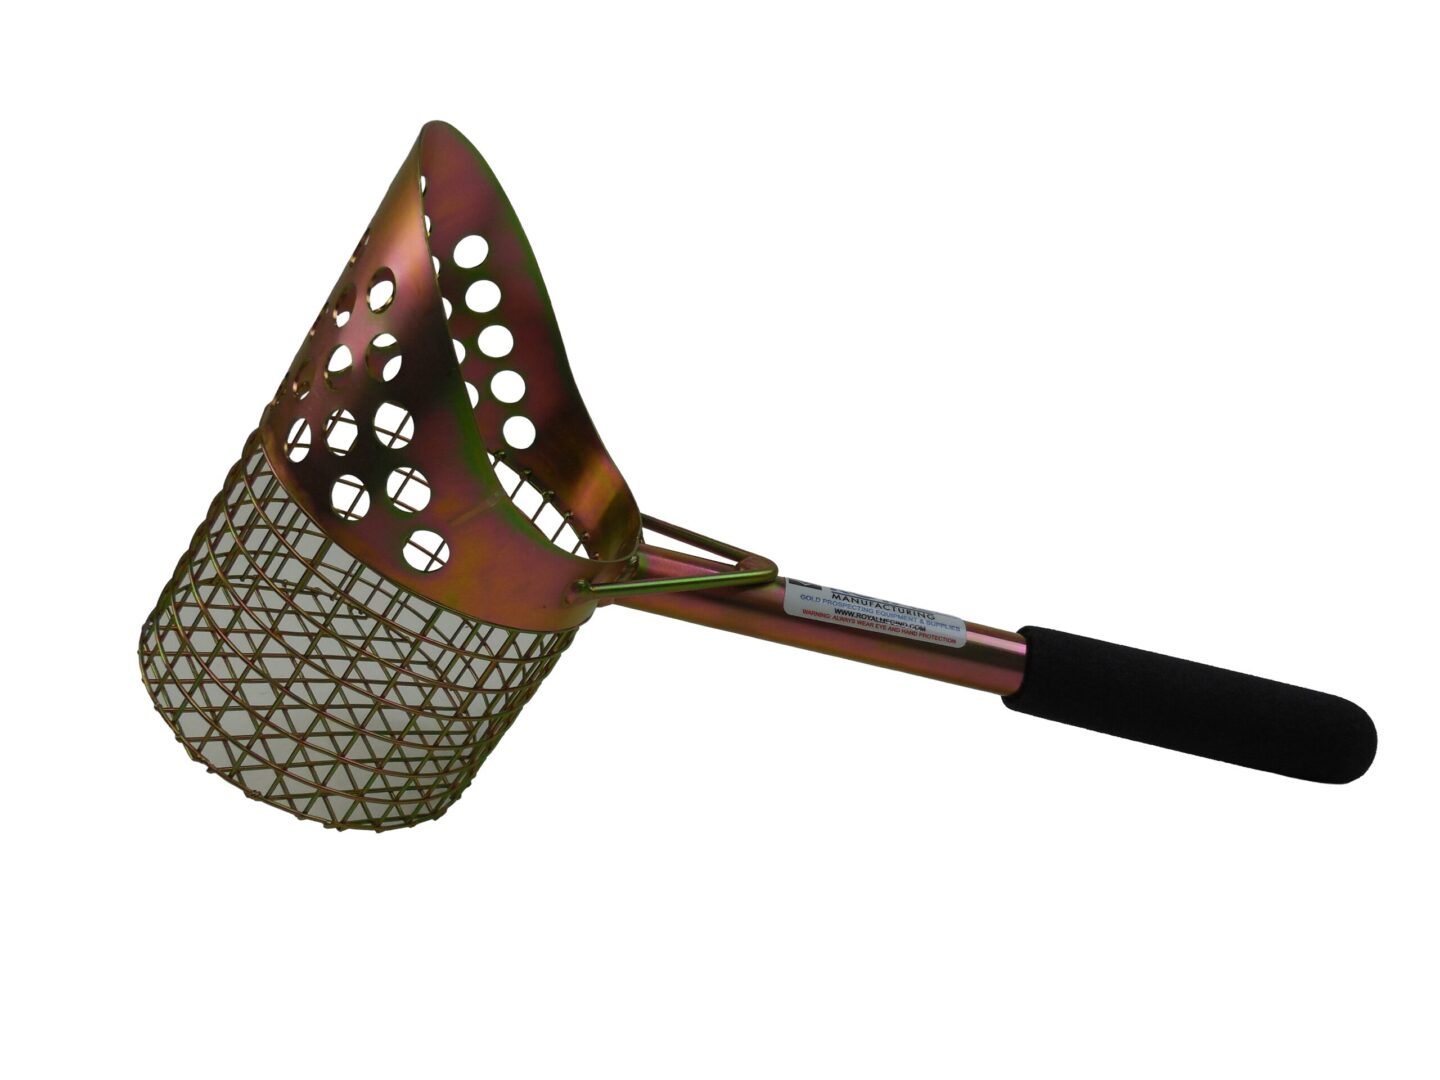 A Sand Scoop for Metal Detecting 15-inch long 5-inch diameter basket 7-1/2 deep with perforated bill with a black handle on a white background.